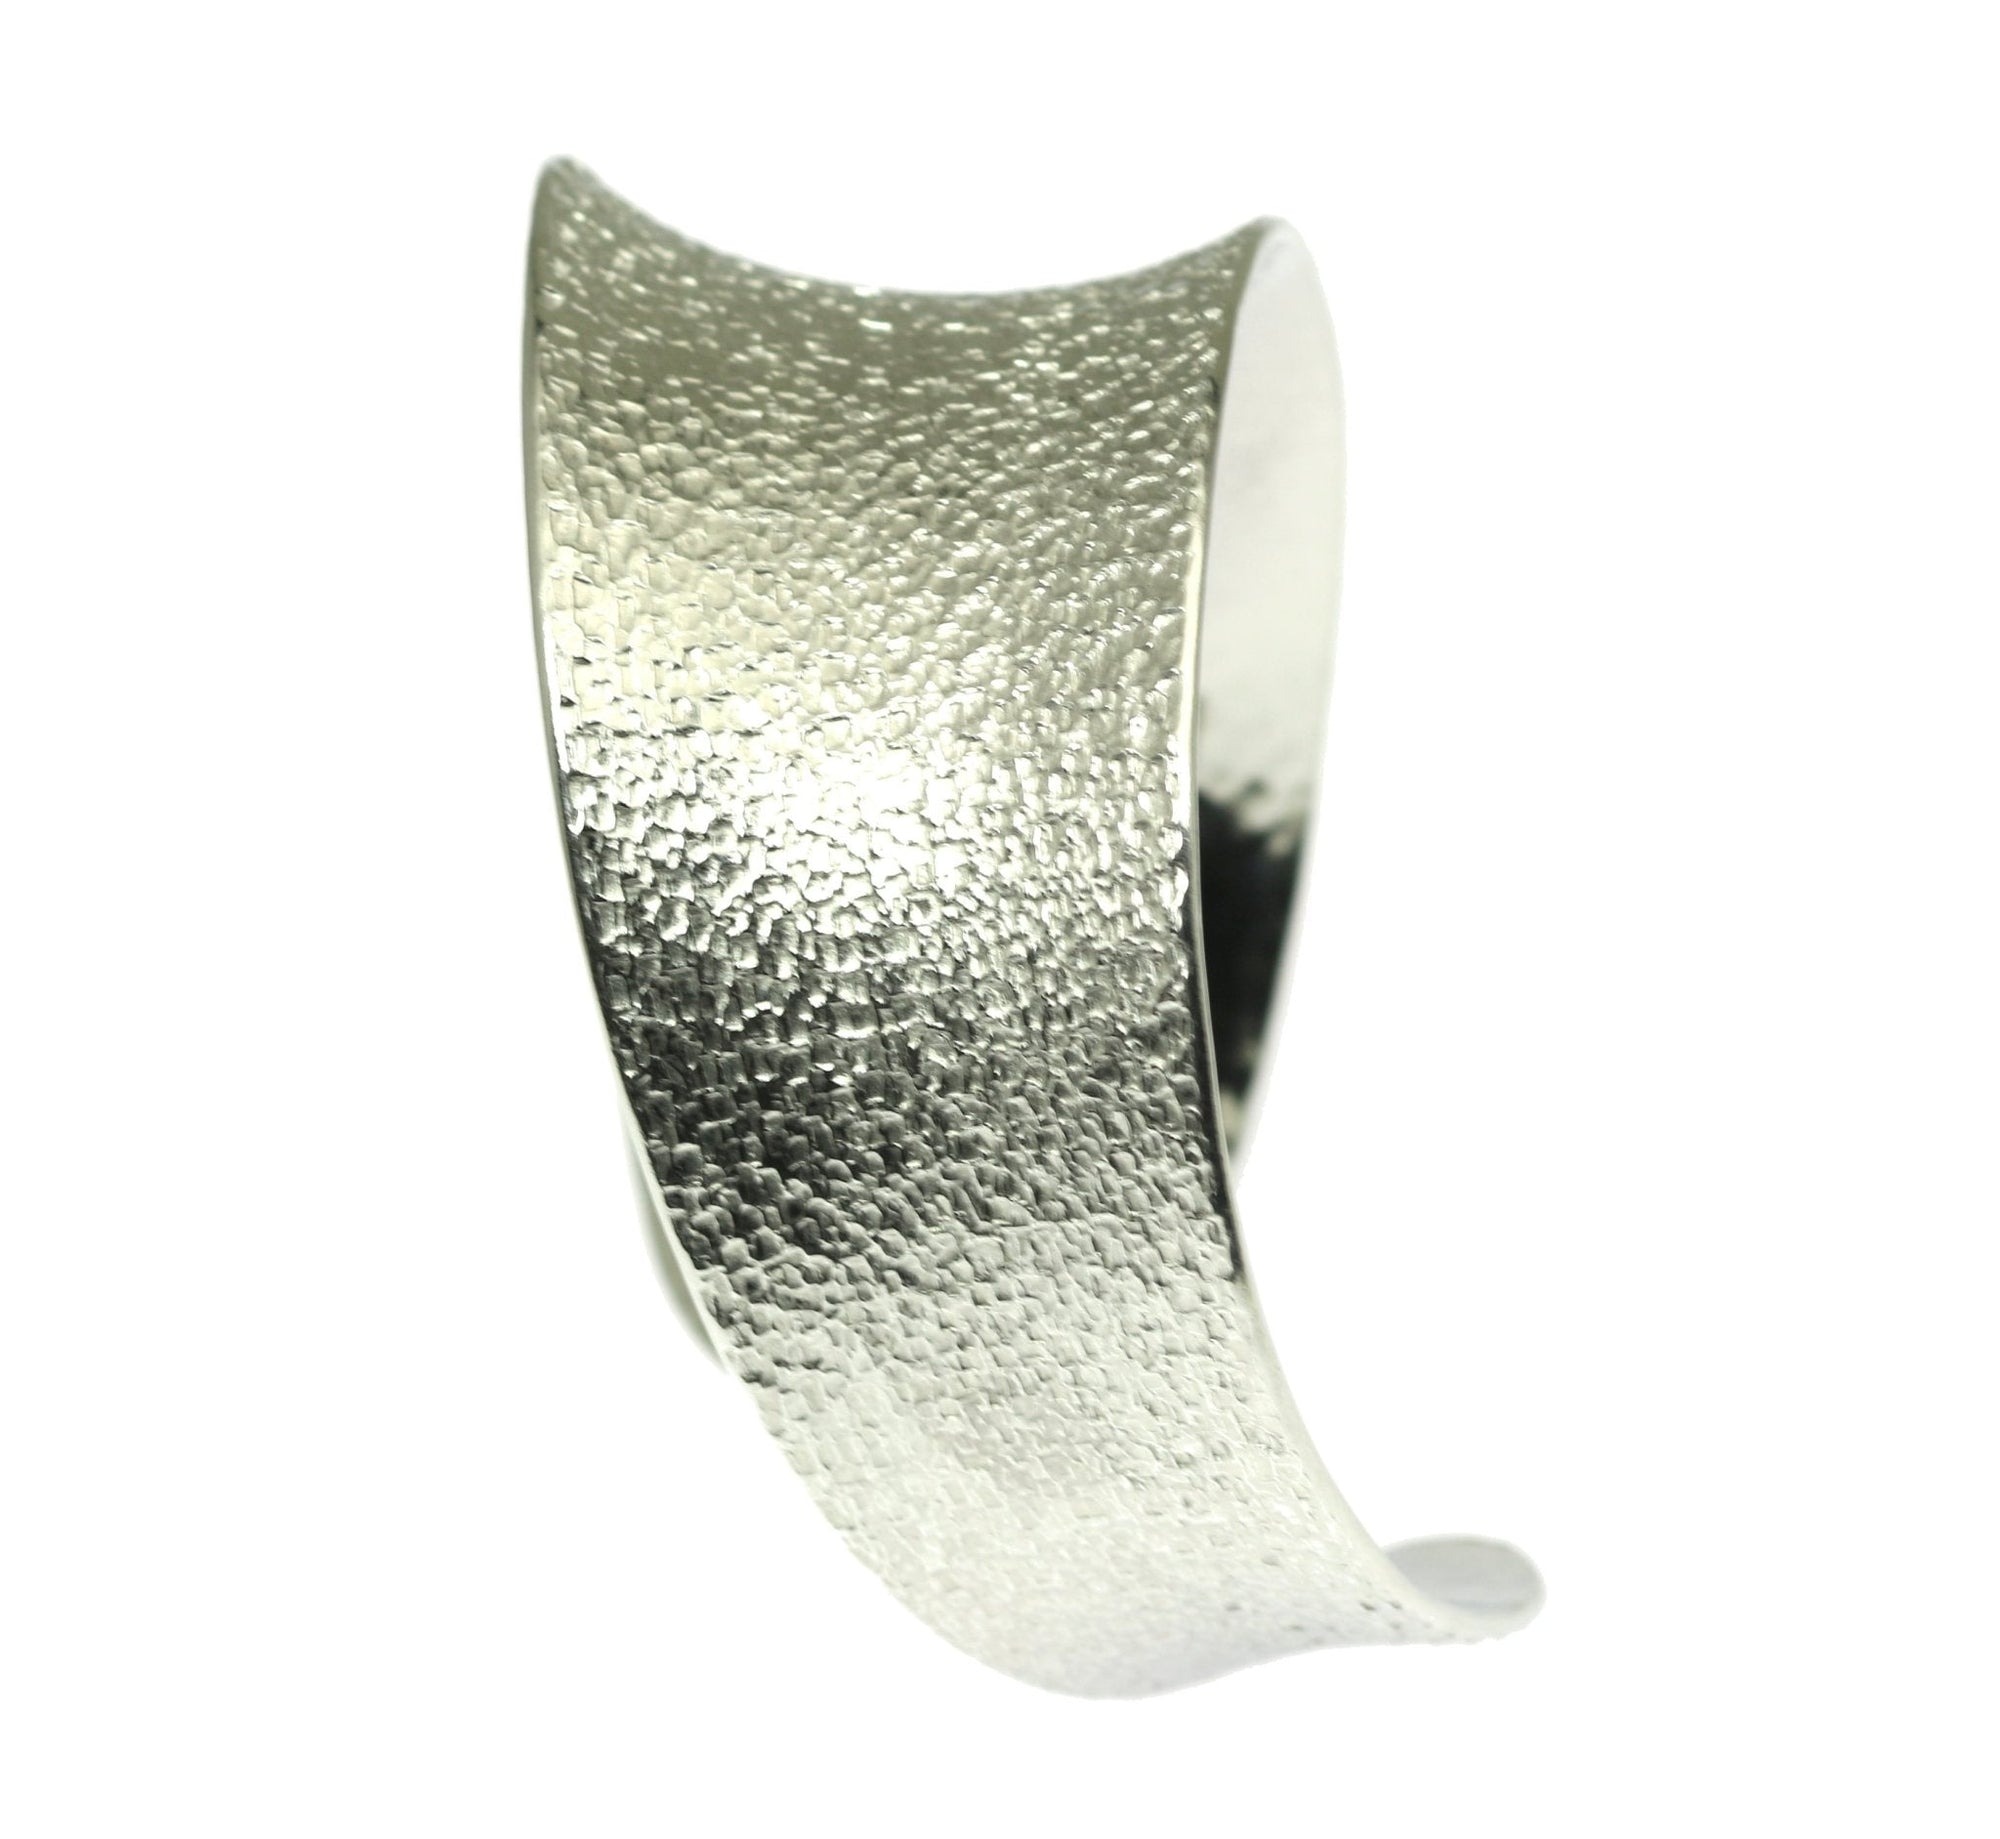 Size View of Texturized Aluminum Anticlastic Bangle